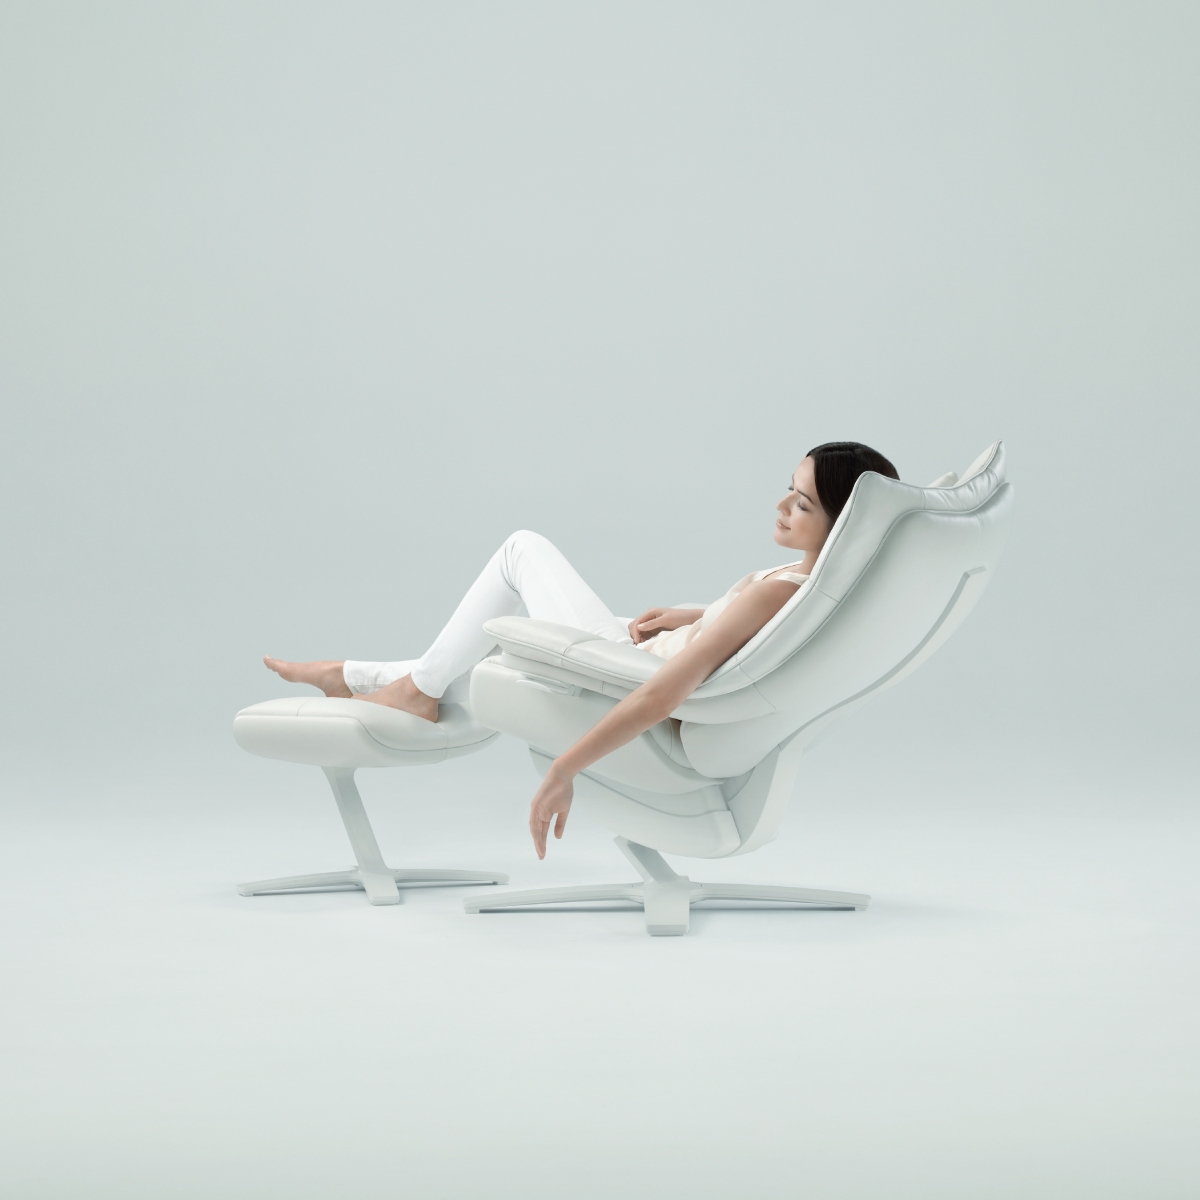 Natuzzi editorial - Comfort that moves with you